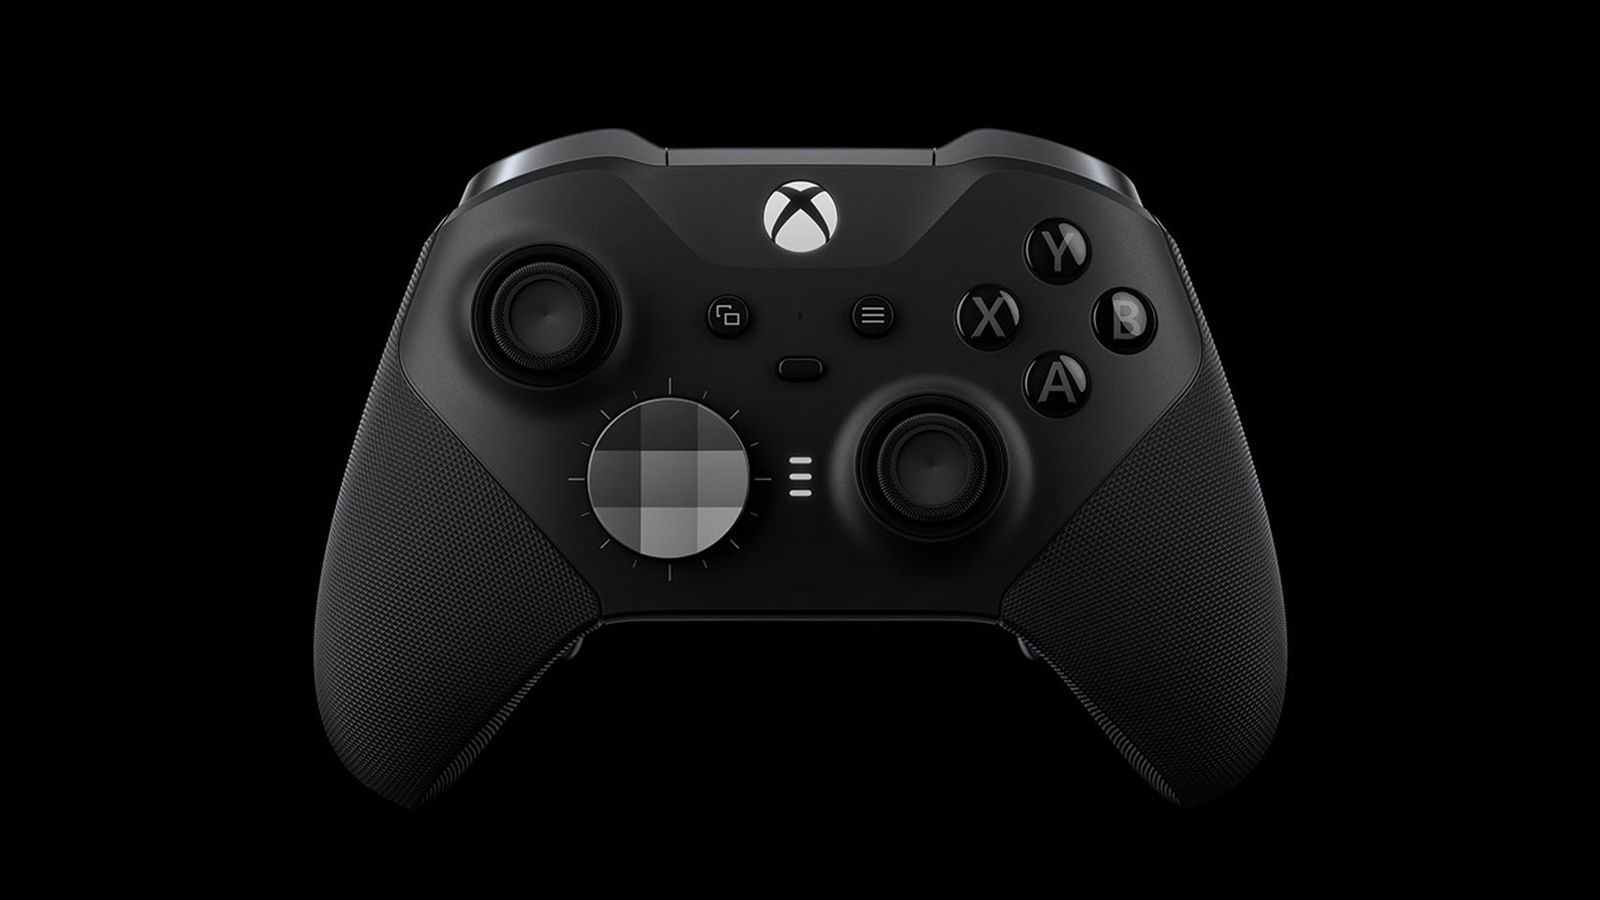 Xbox Elite Series 2 product image of an all-black Xbox gamepad.